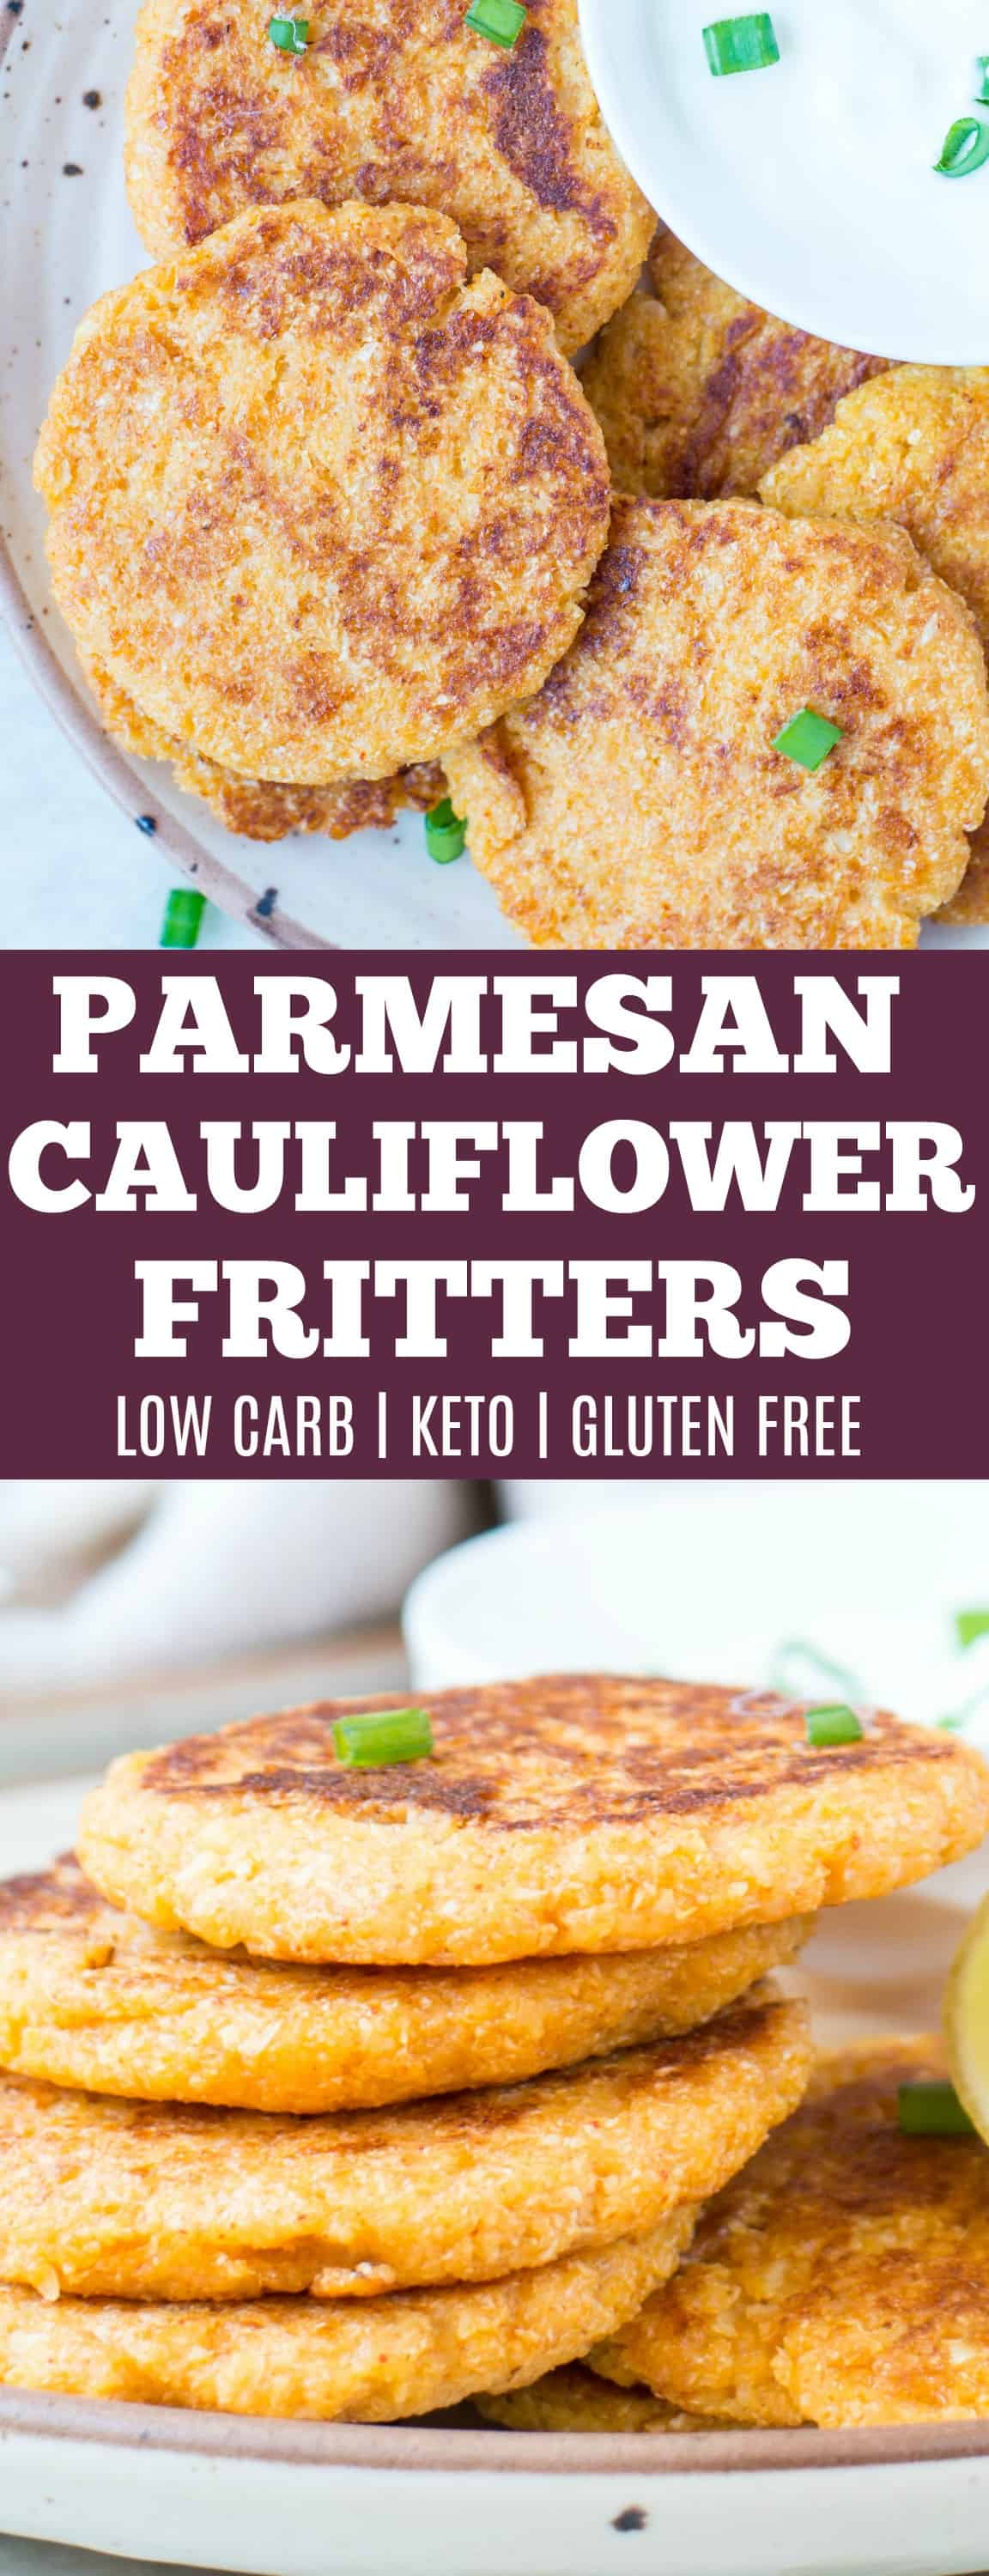 Pin of stack of Parmesan Cauliflower Fritters recipe